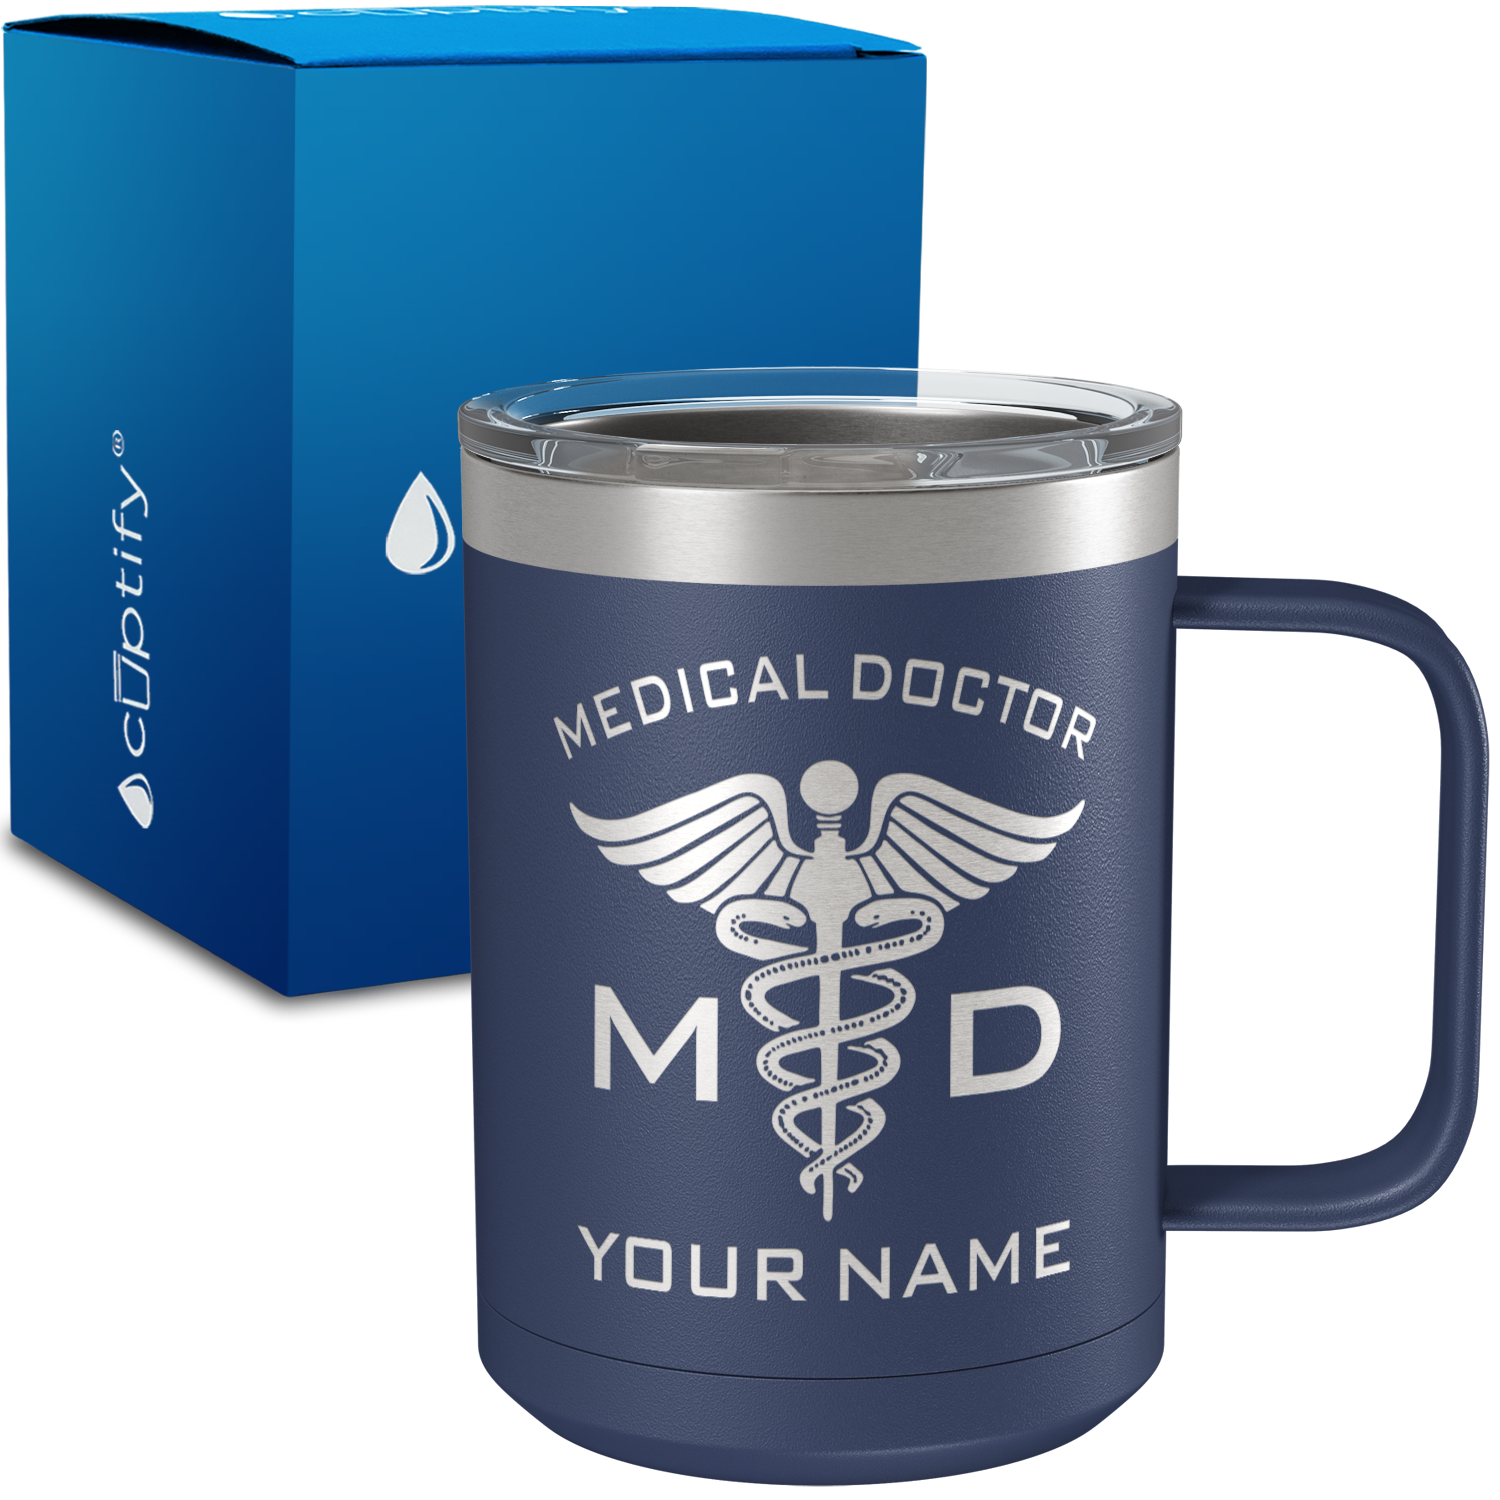 MD Medical Doctor Personalized 15oz Stainless Steel Mug